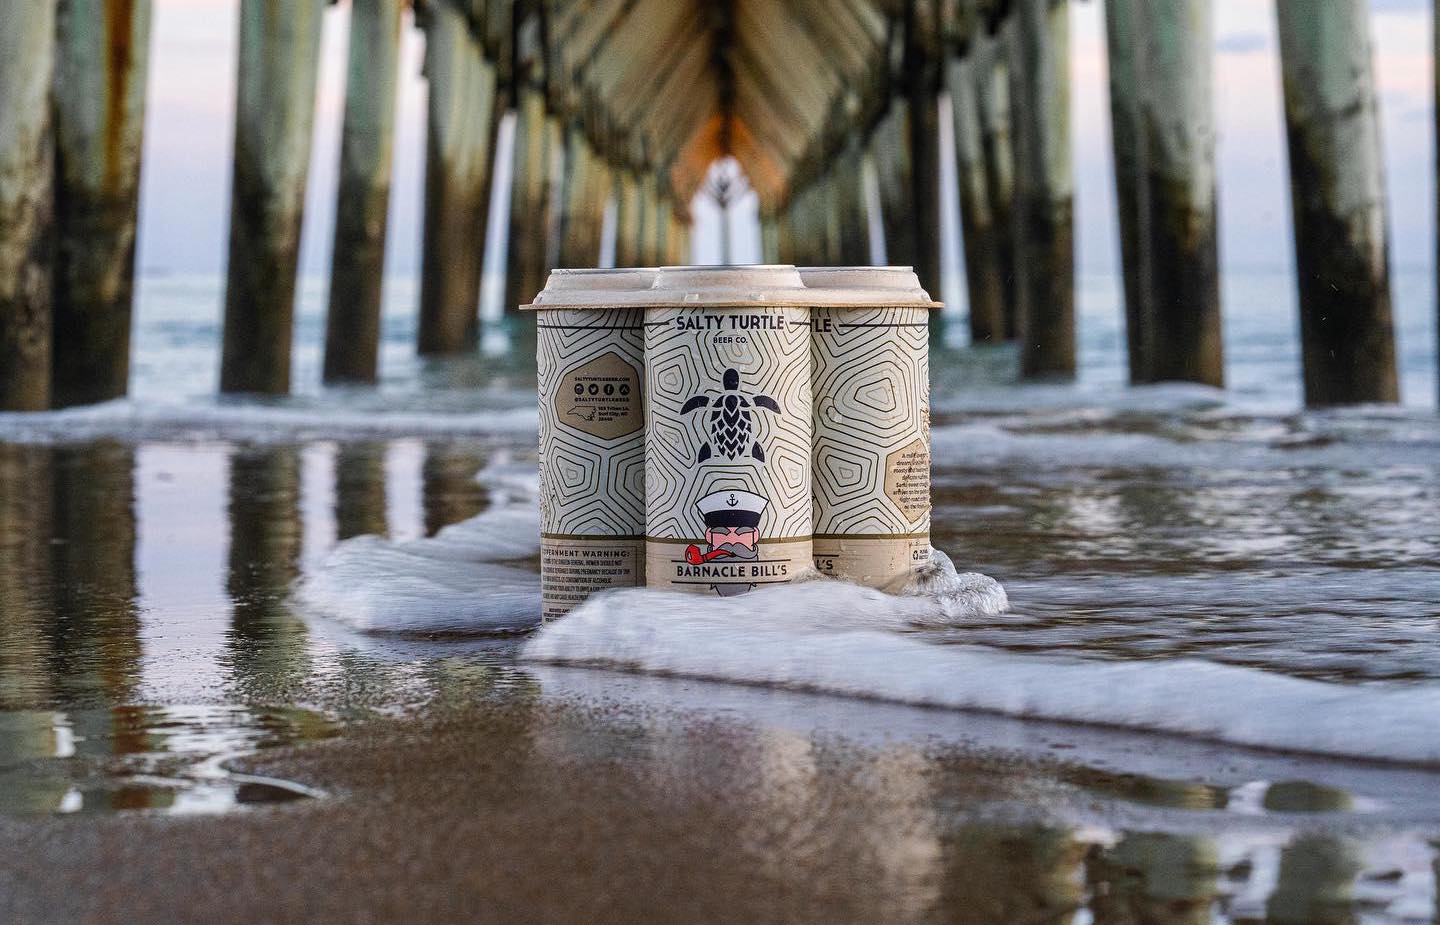 salty turtle cans on the beach